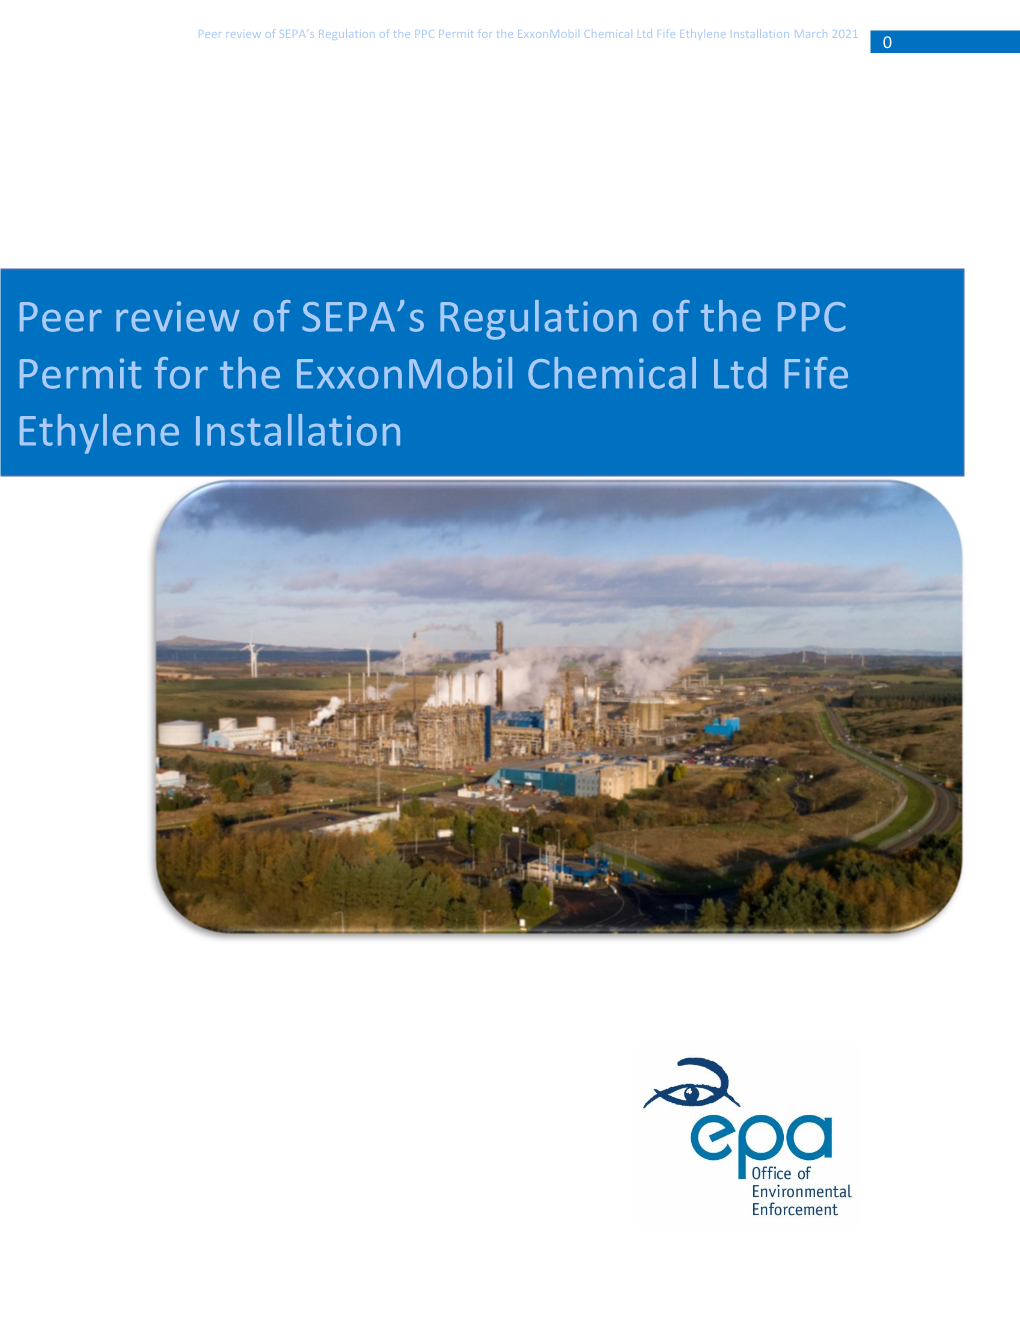 Peer Review of SEPA's Regulation of the PPC Permit for the Exxonmobil